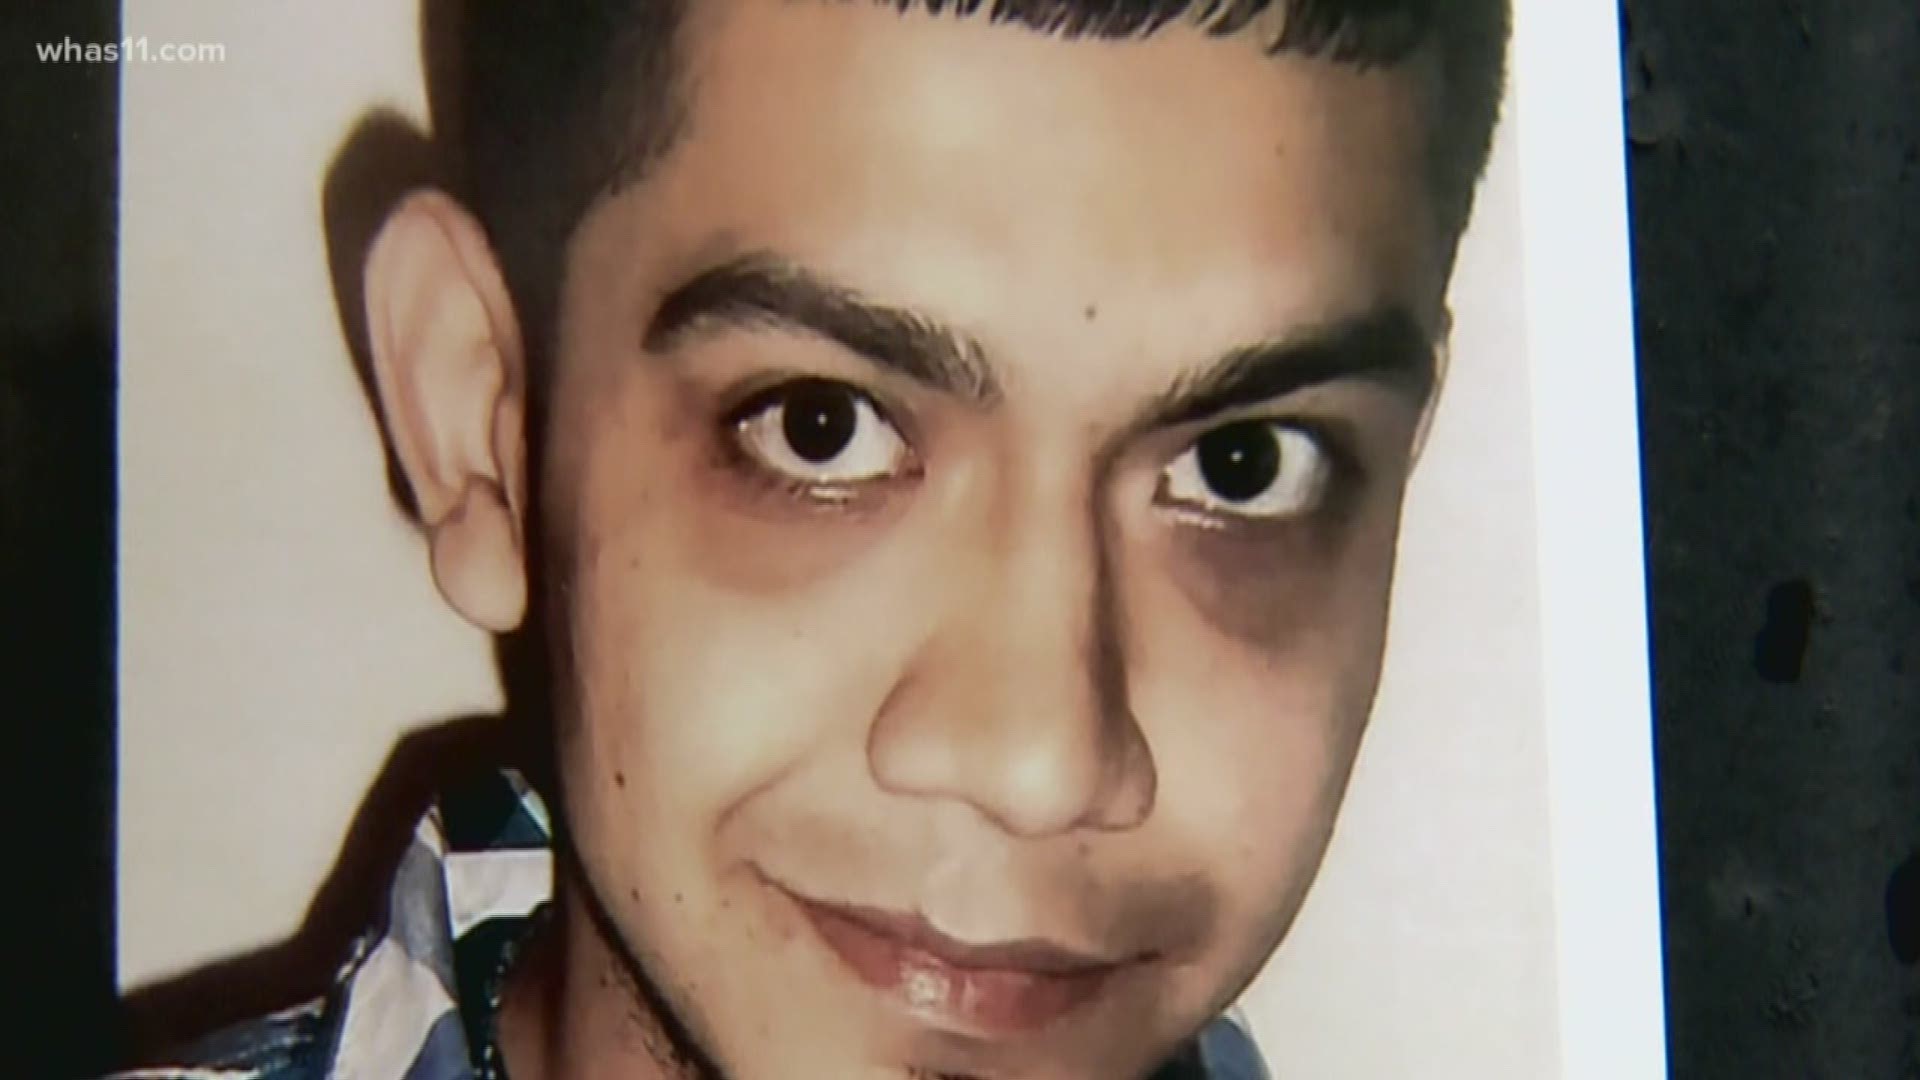 Oscar Guerrero was murdered in the Kentucky Towers apartment complex in April 2019.